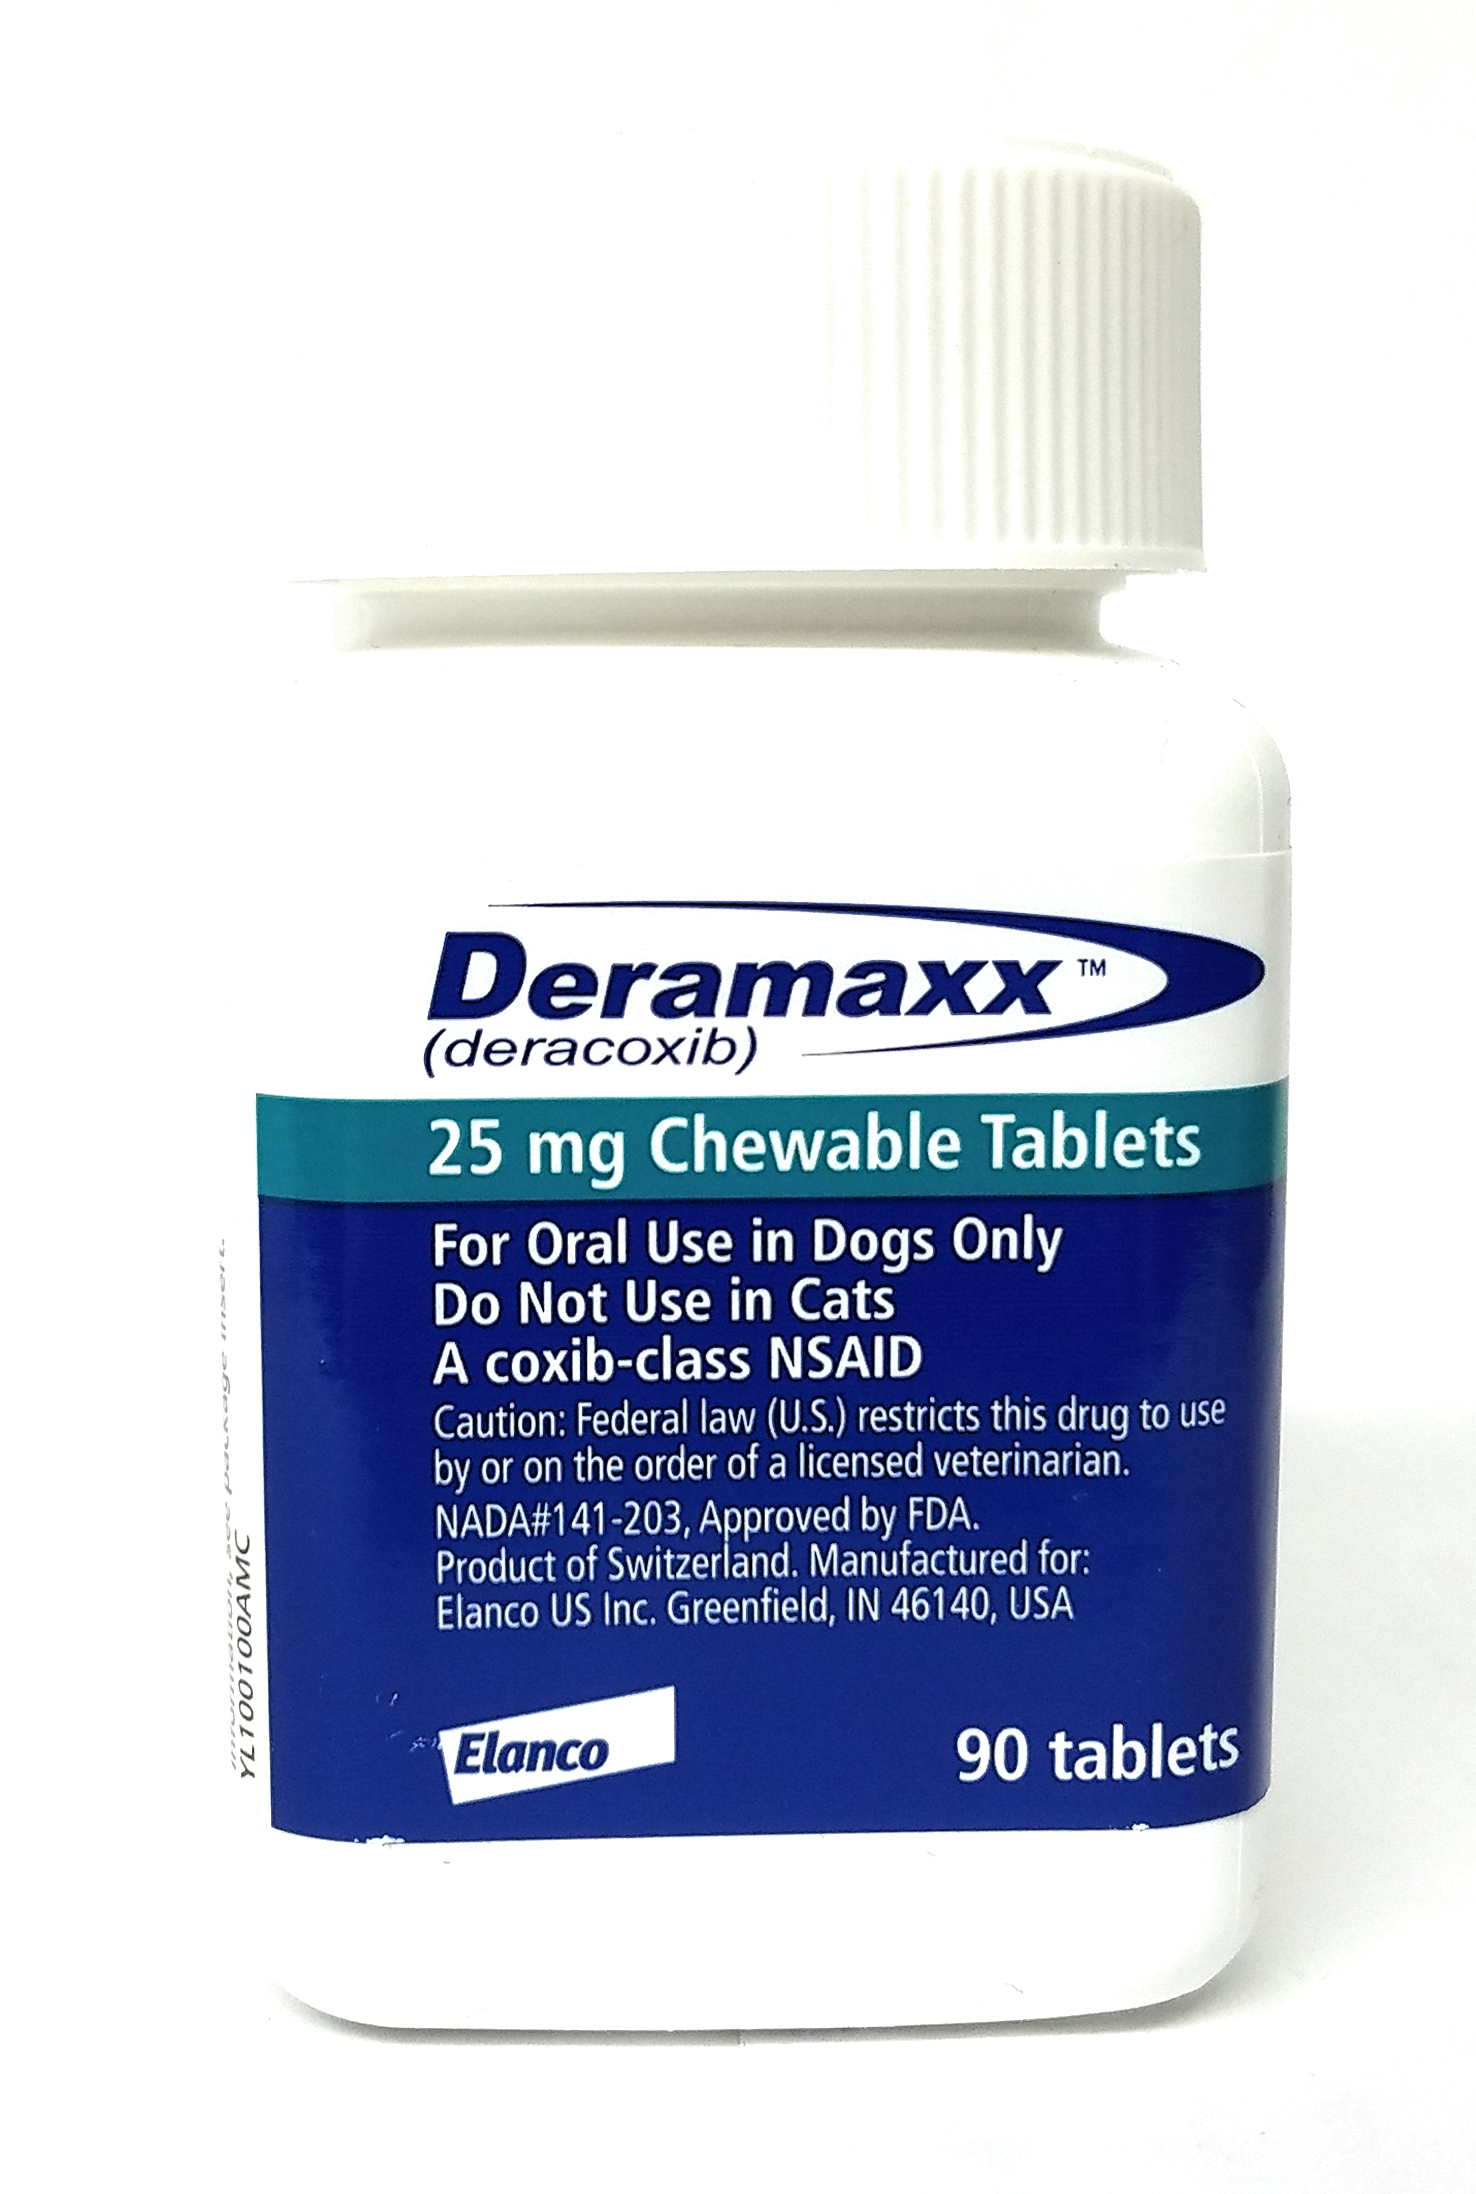 vet-approved-rx-deramaxx-25mg-chewable-tablets-30-count-bottle-for-pets